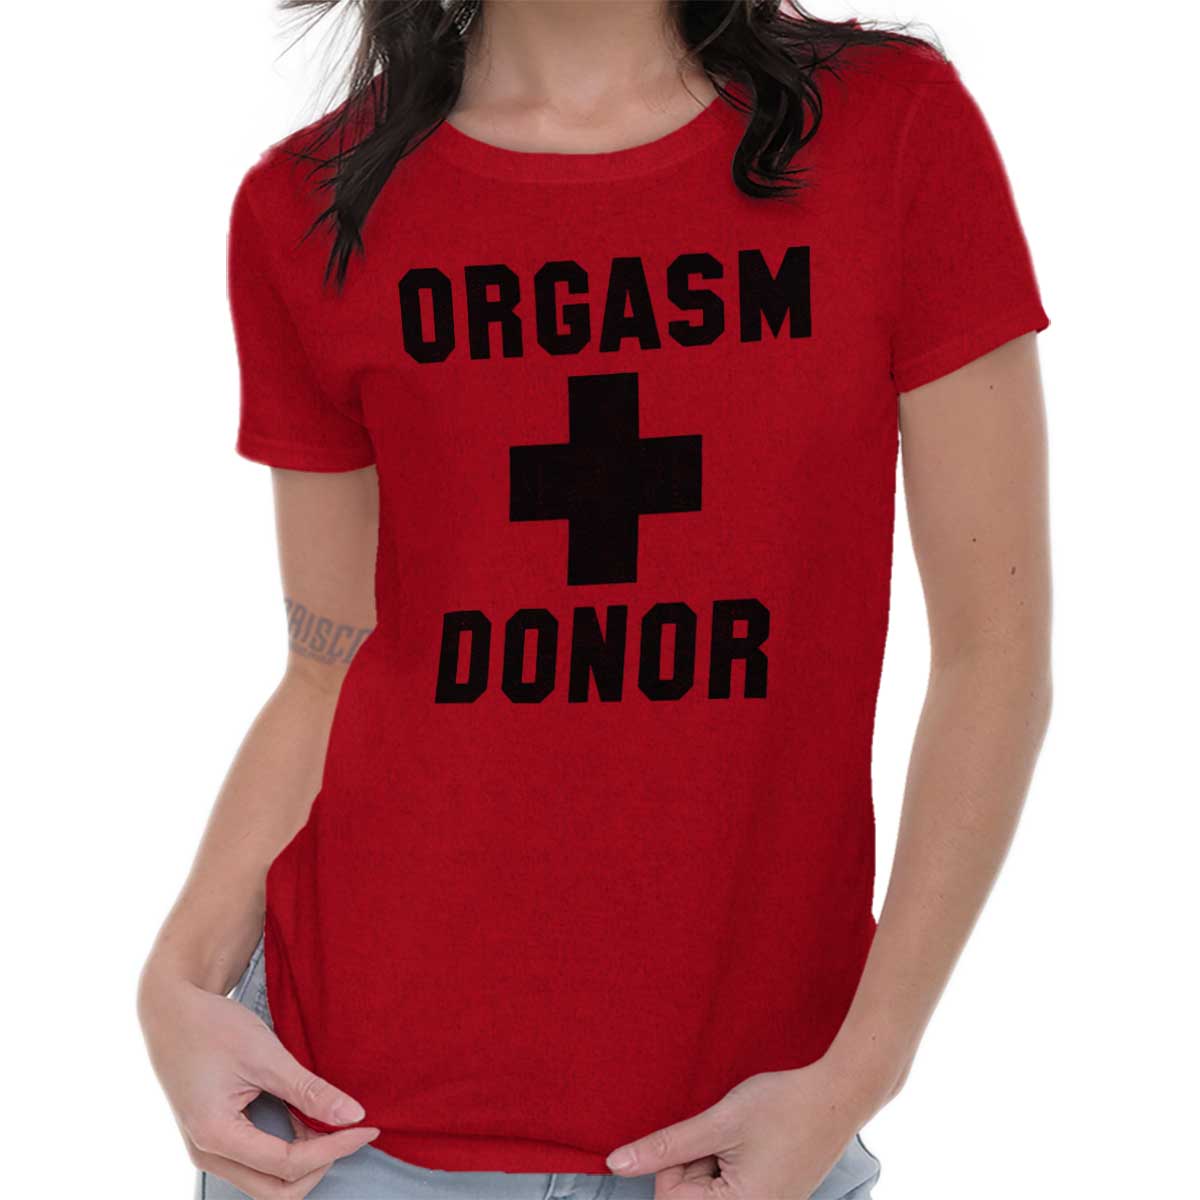 Orgasm Donor Funny Joke Offensive Humor T Graphic T Shirts For Women